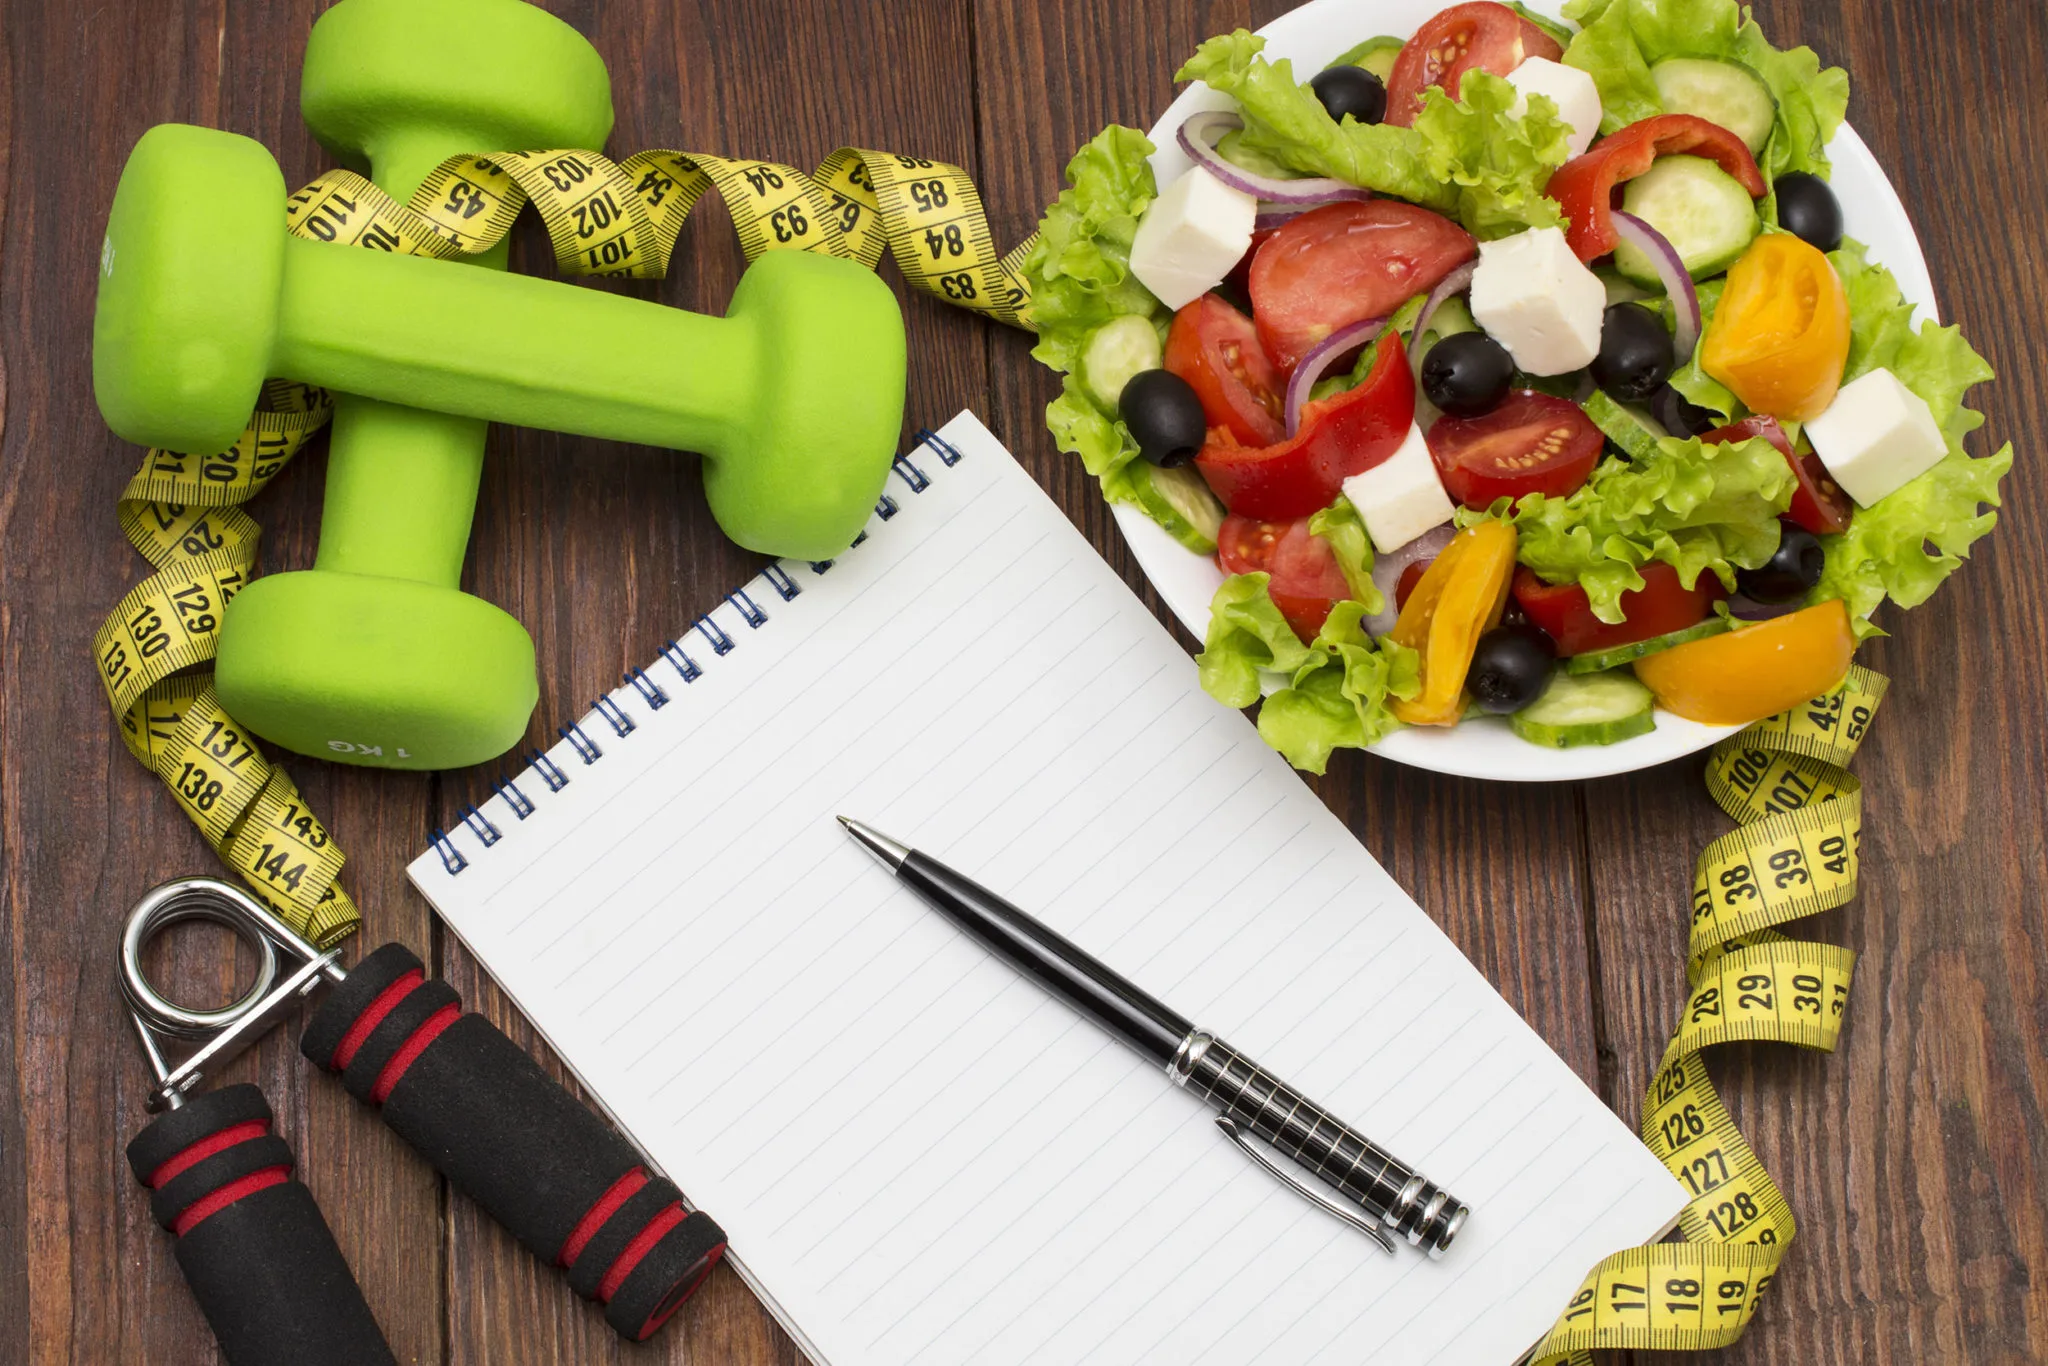 Best Sports Nutrition Tips For Peak Performance Of Athletes